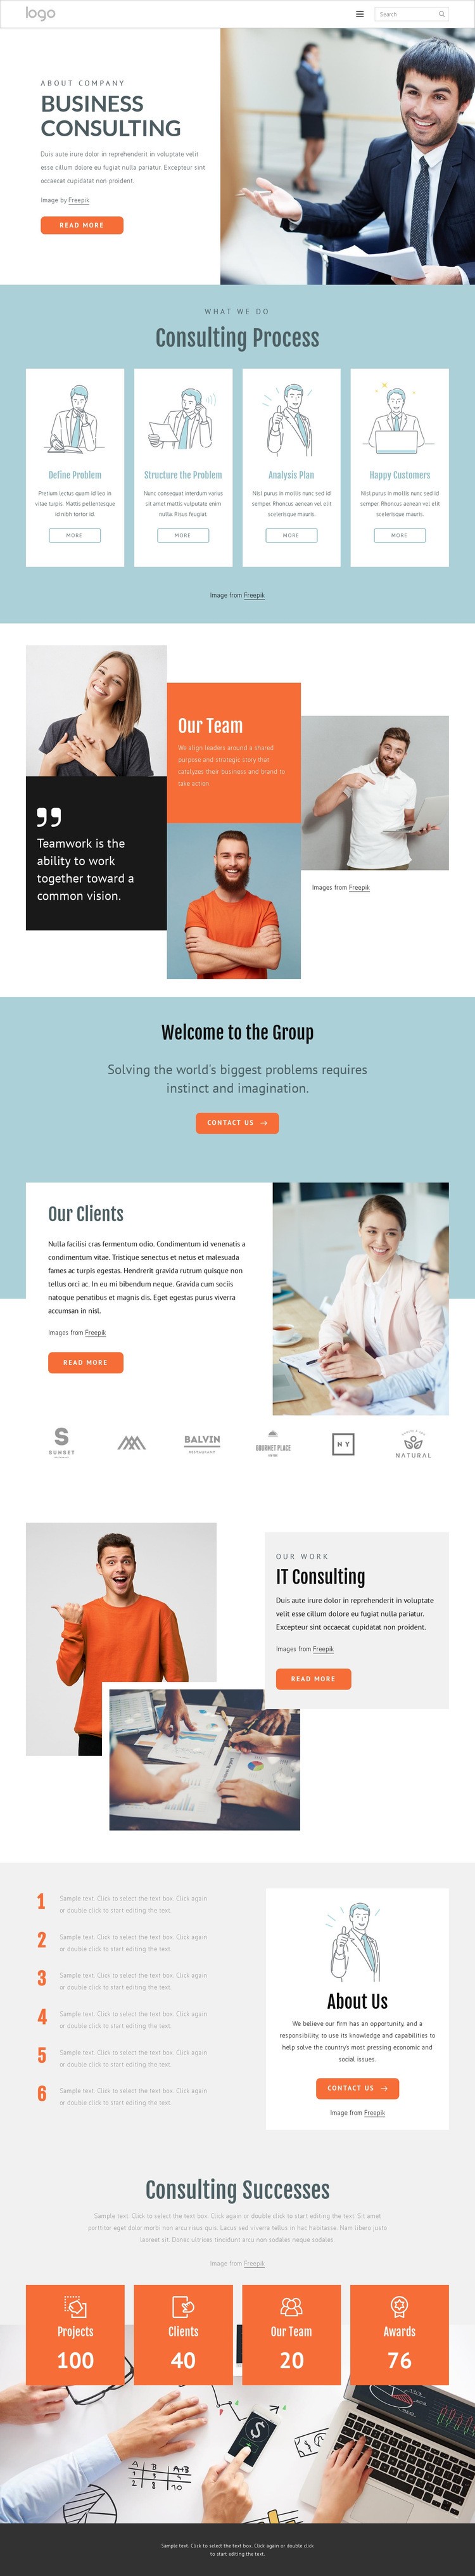 Consulting group Webflow Template Alternative